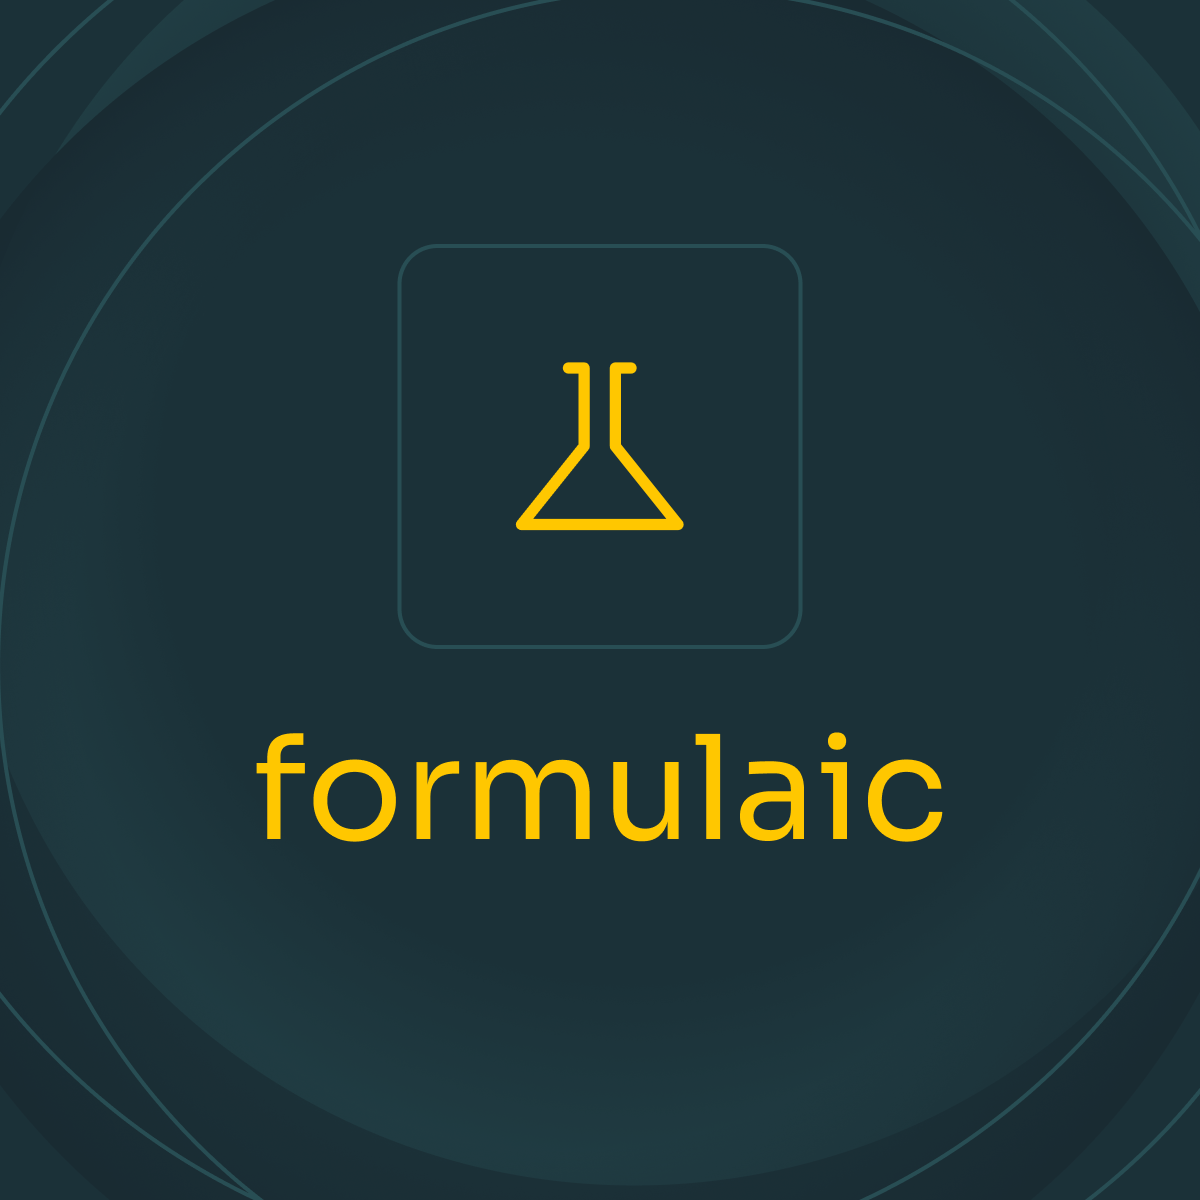 An image of the Formulaic logo and workdmark on an abstract background design.